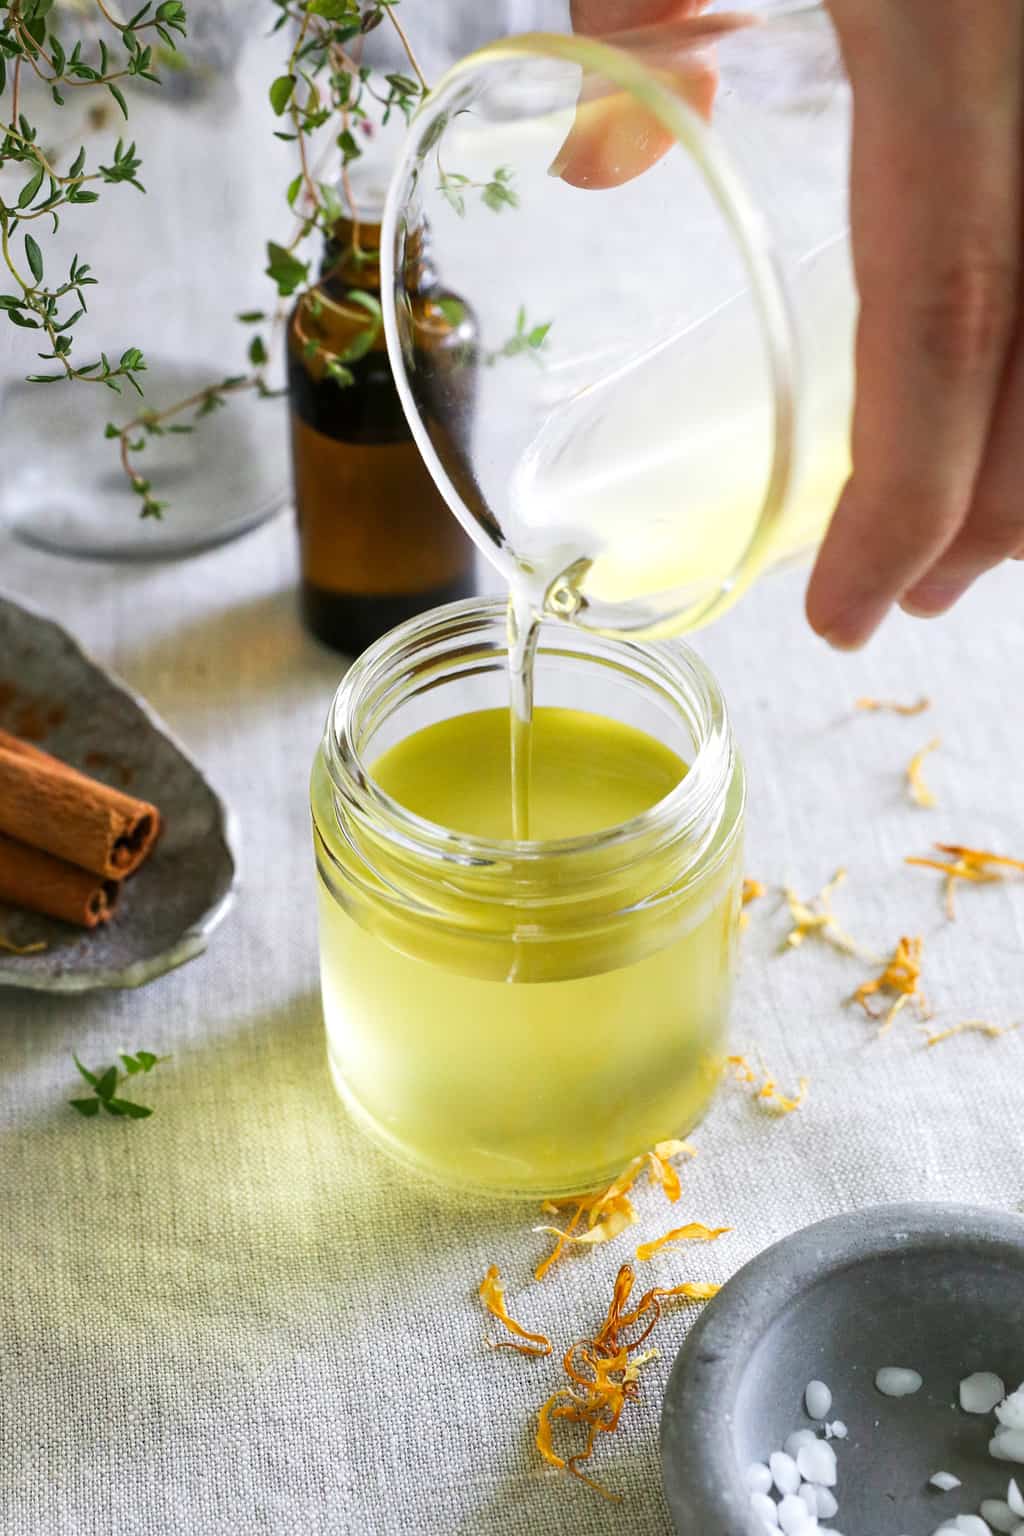 Pour muscle balm mixture into jar and let cool